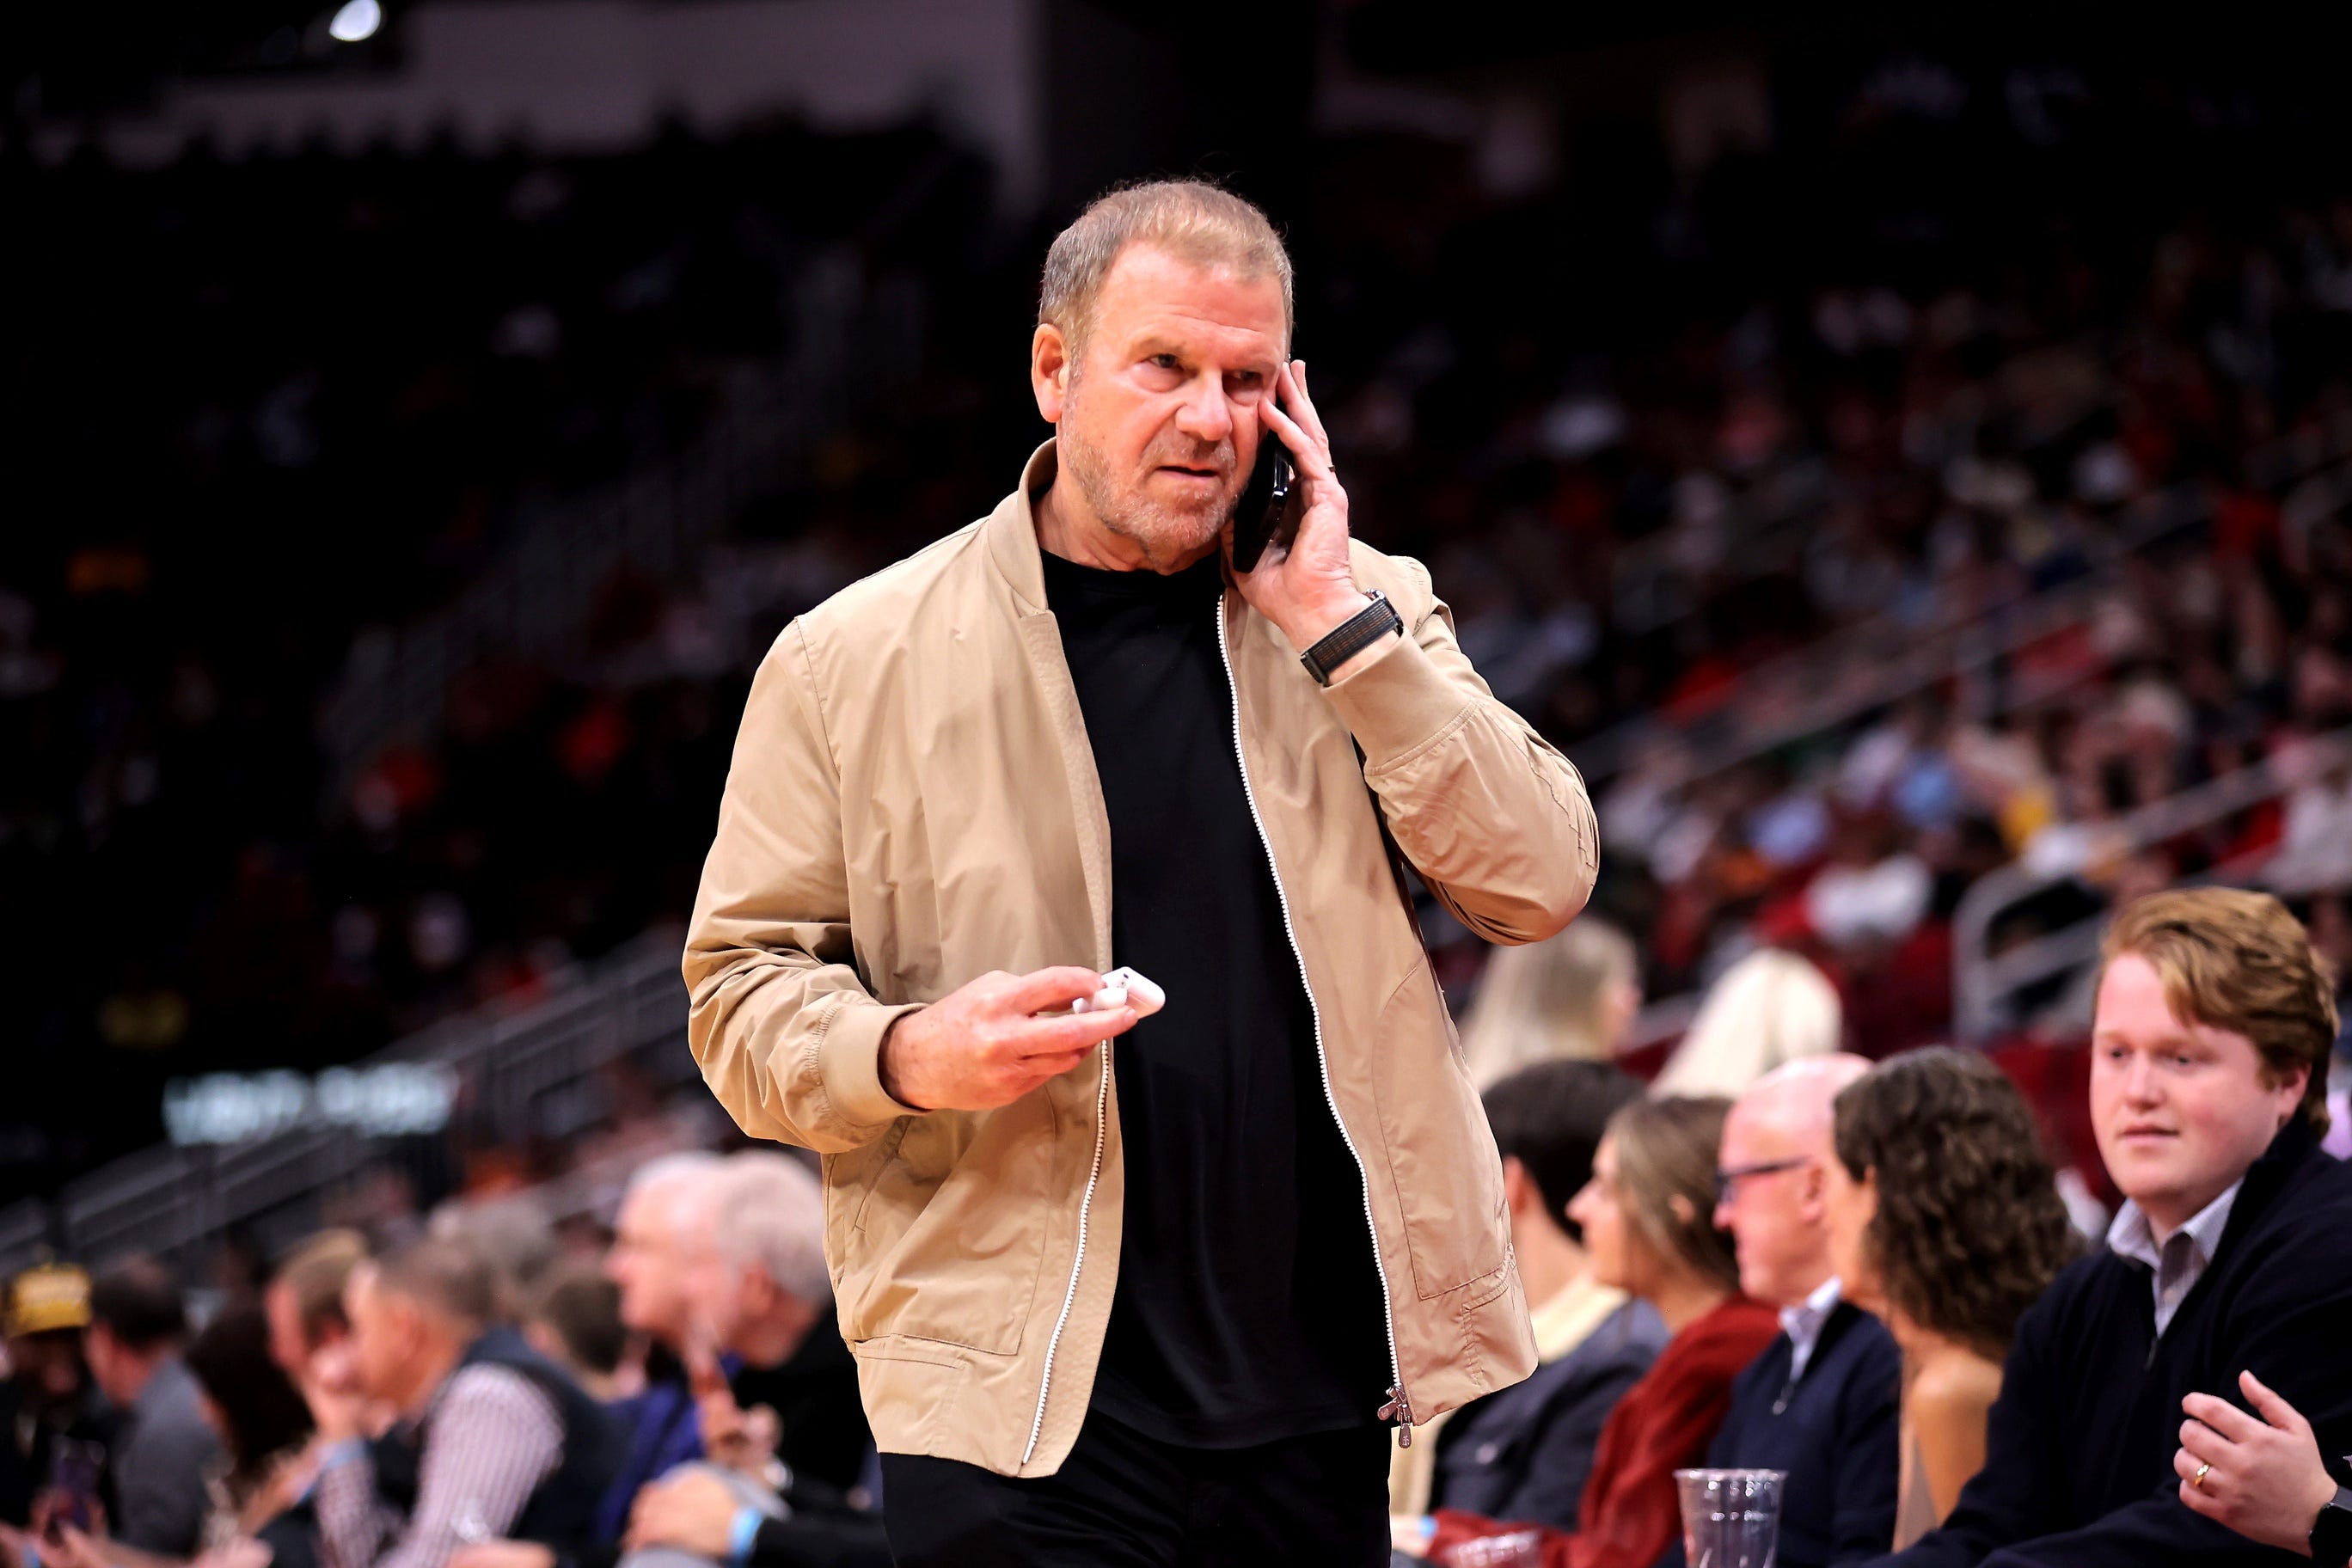 rockets owner tilman fertitta ranked no. 18 among world’s richest sports owners